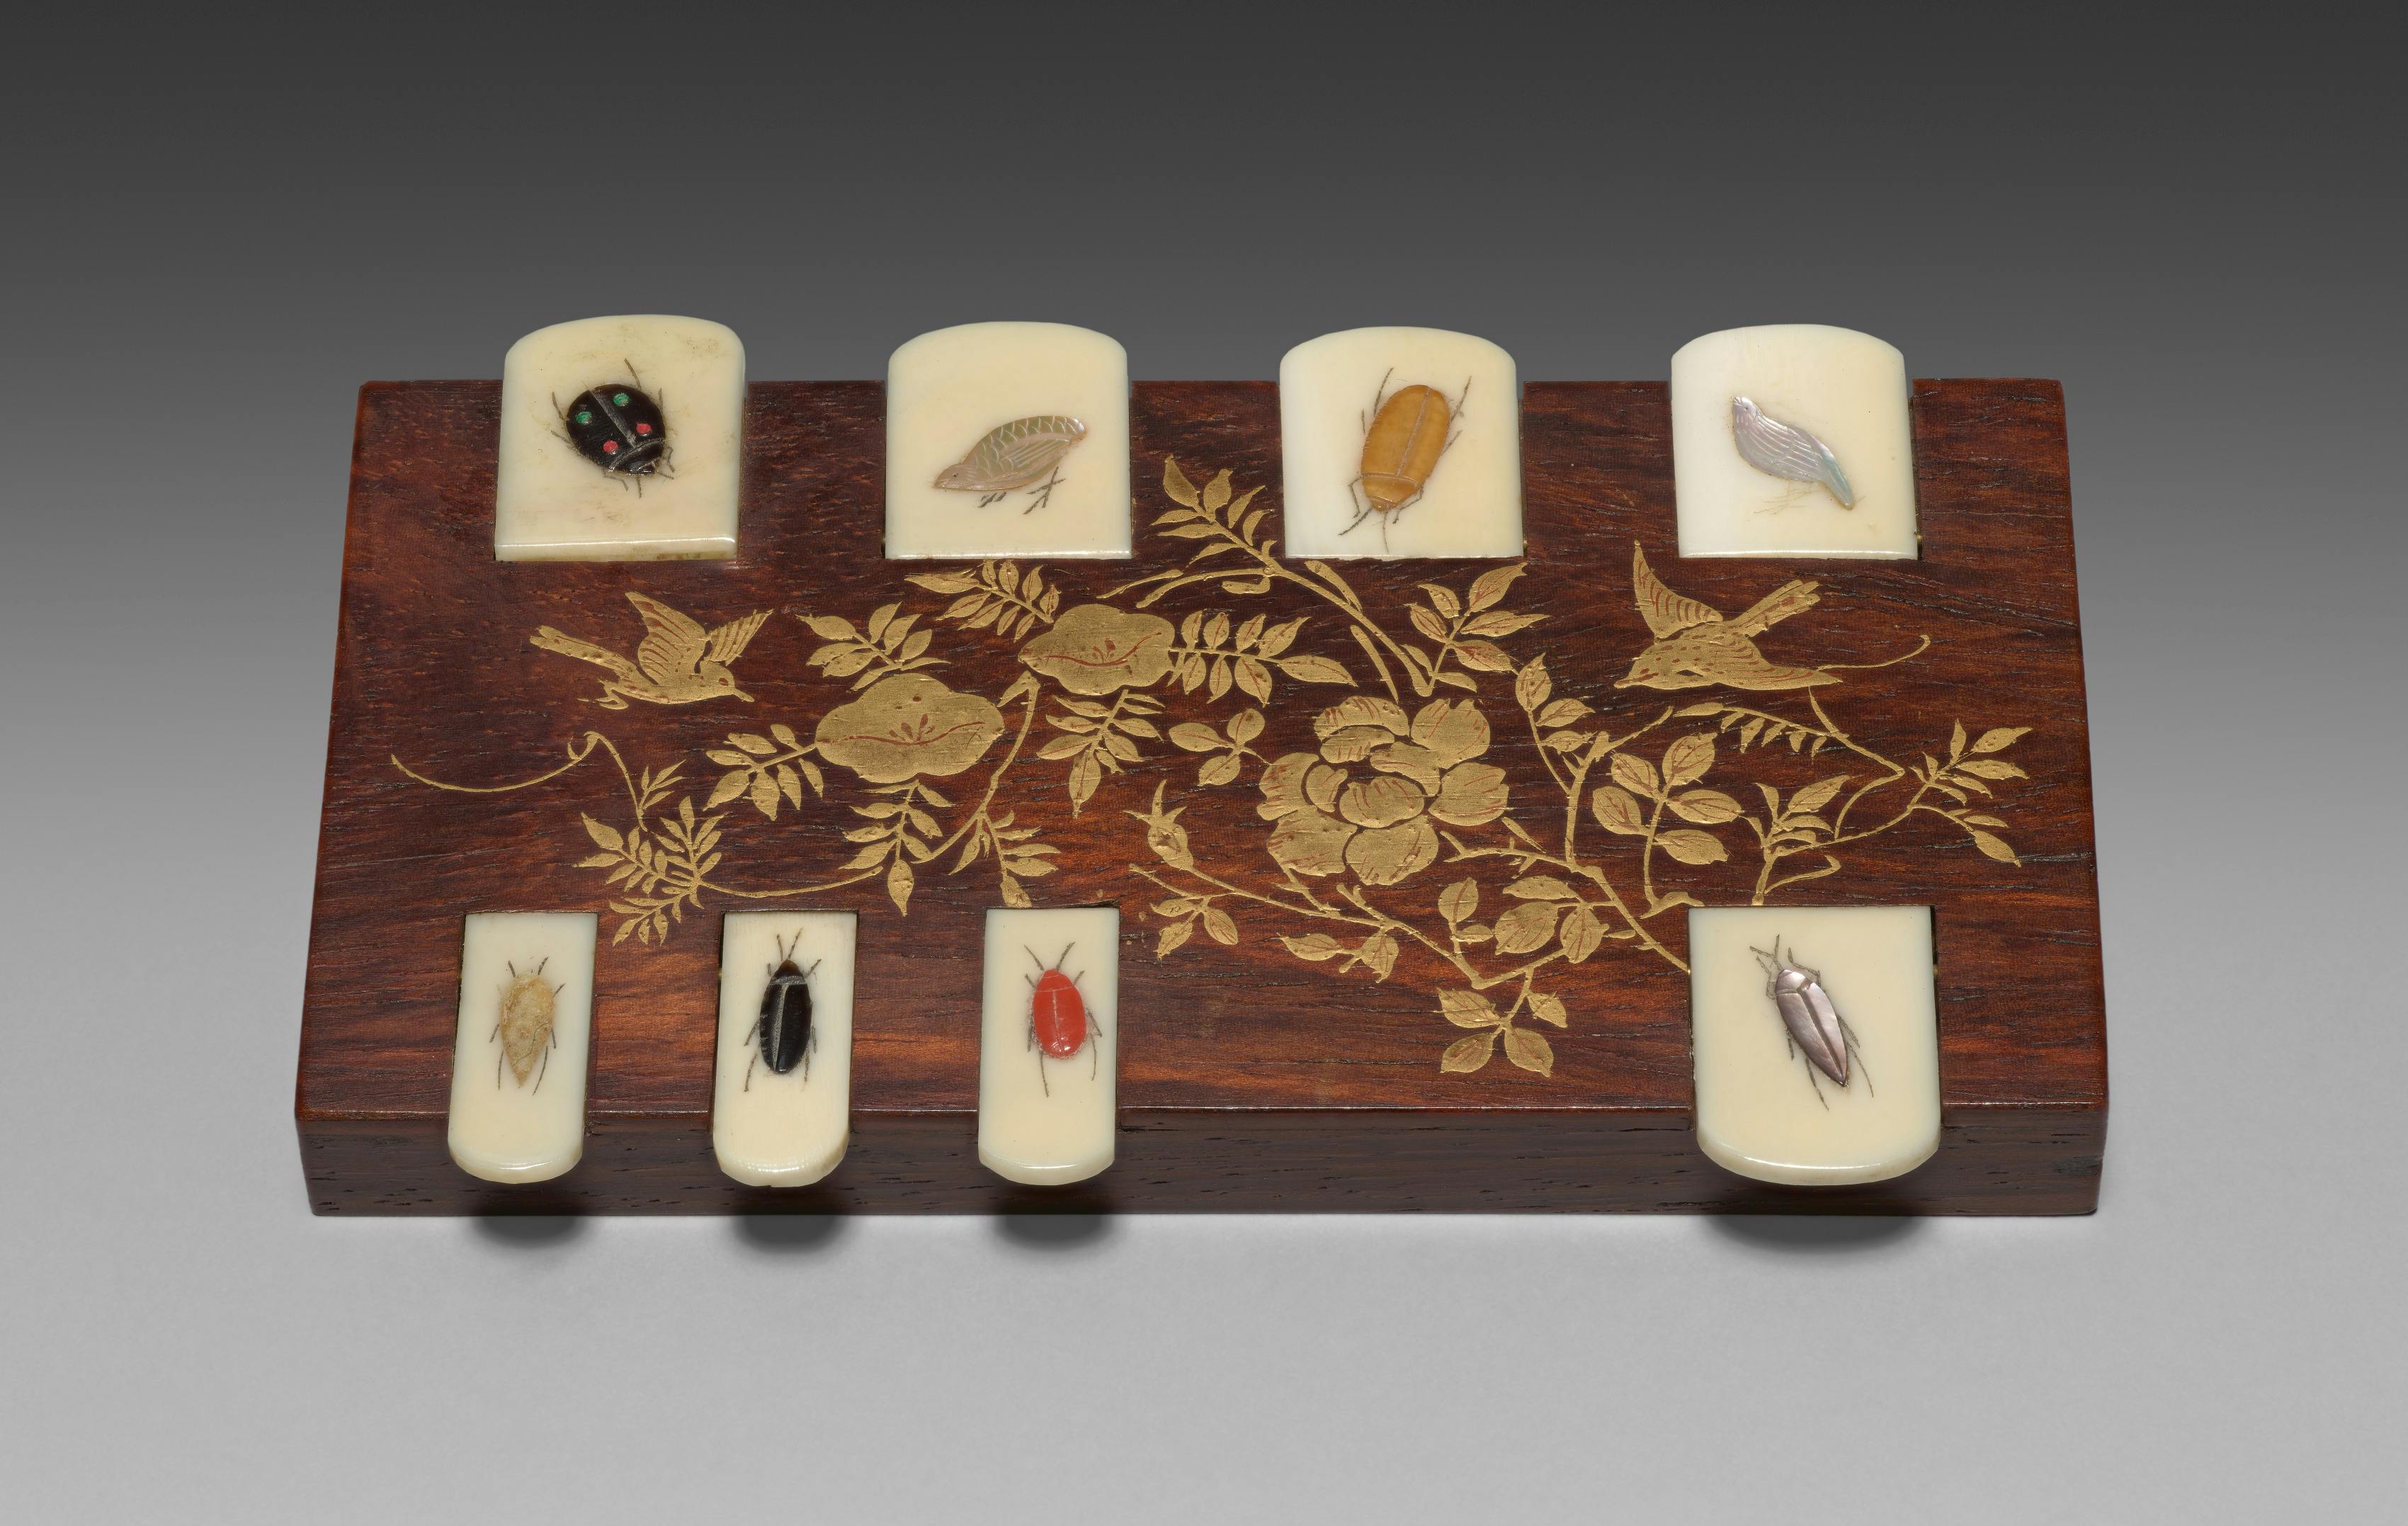 whist counting board from the Education Art Collection